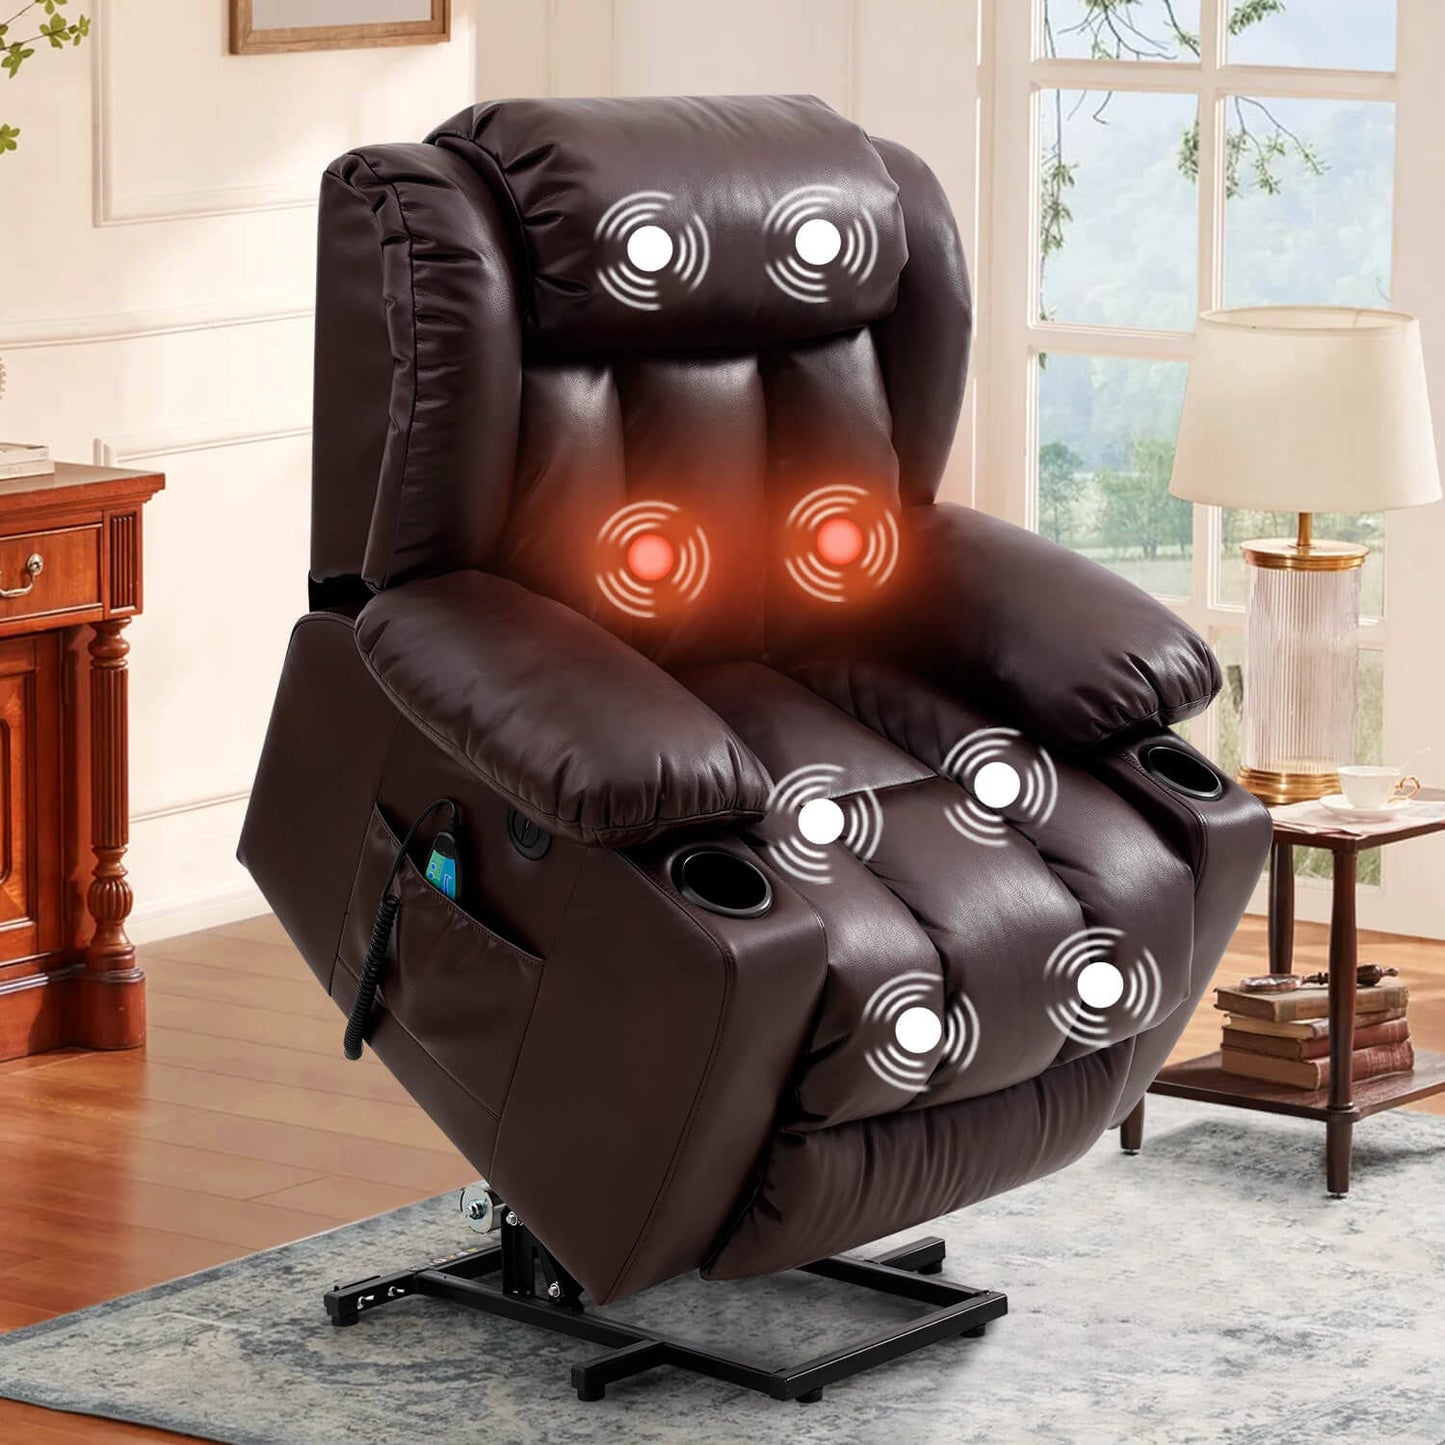 Lift Recliners For Elderly With Heat And Massage, Large Brown Leather Power Lift Recliner Chairs